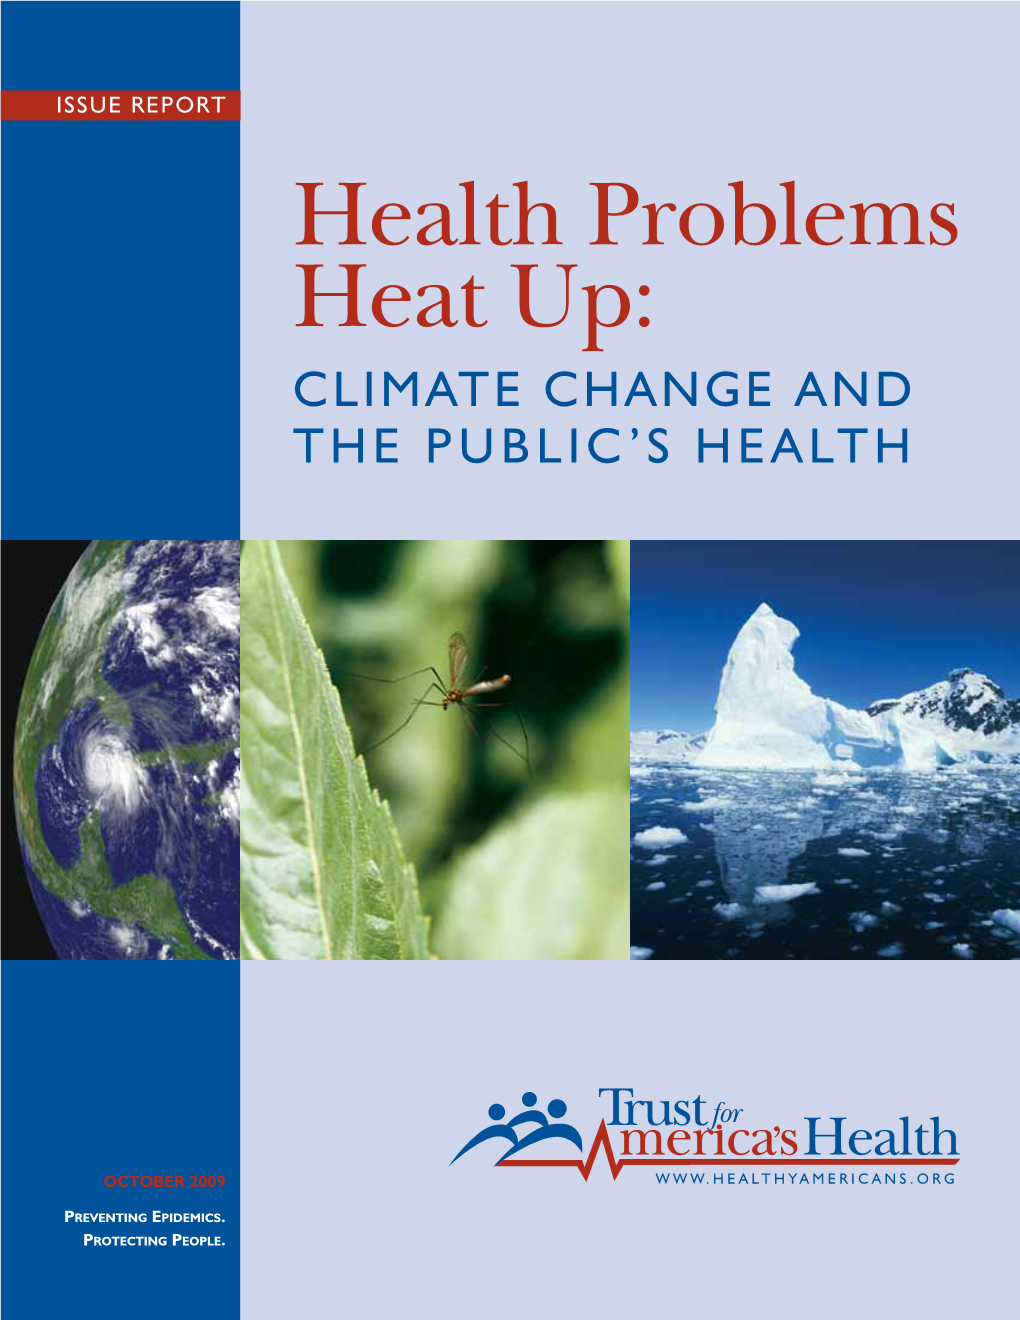 Health Problems Heat Up: CLIMATE CHANGE and the PUBLIC’S HEALTH